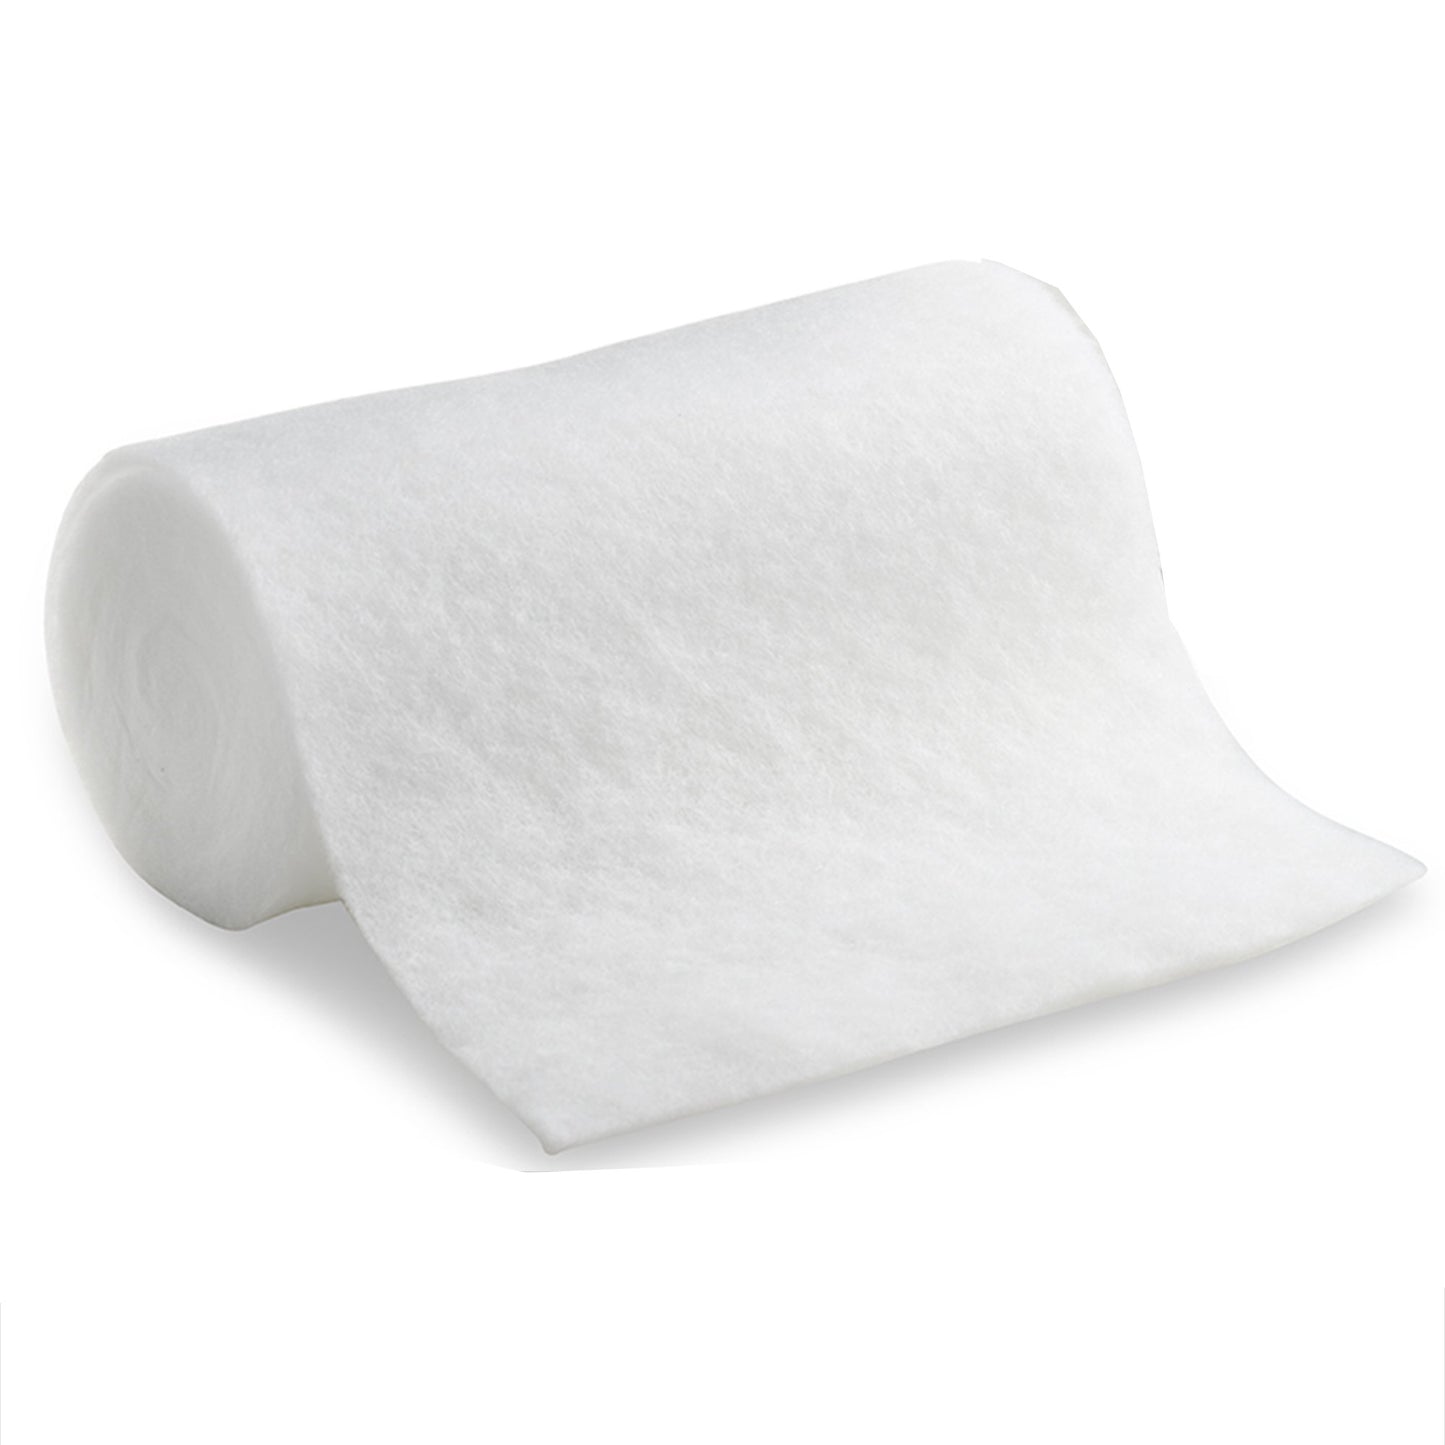 3M™ White Polyester Undercast Cast Padding, 6 Inch X 4 Yard, Sold As 20/Bag 3M Cmw06